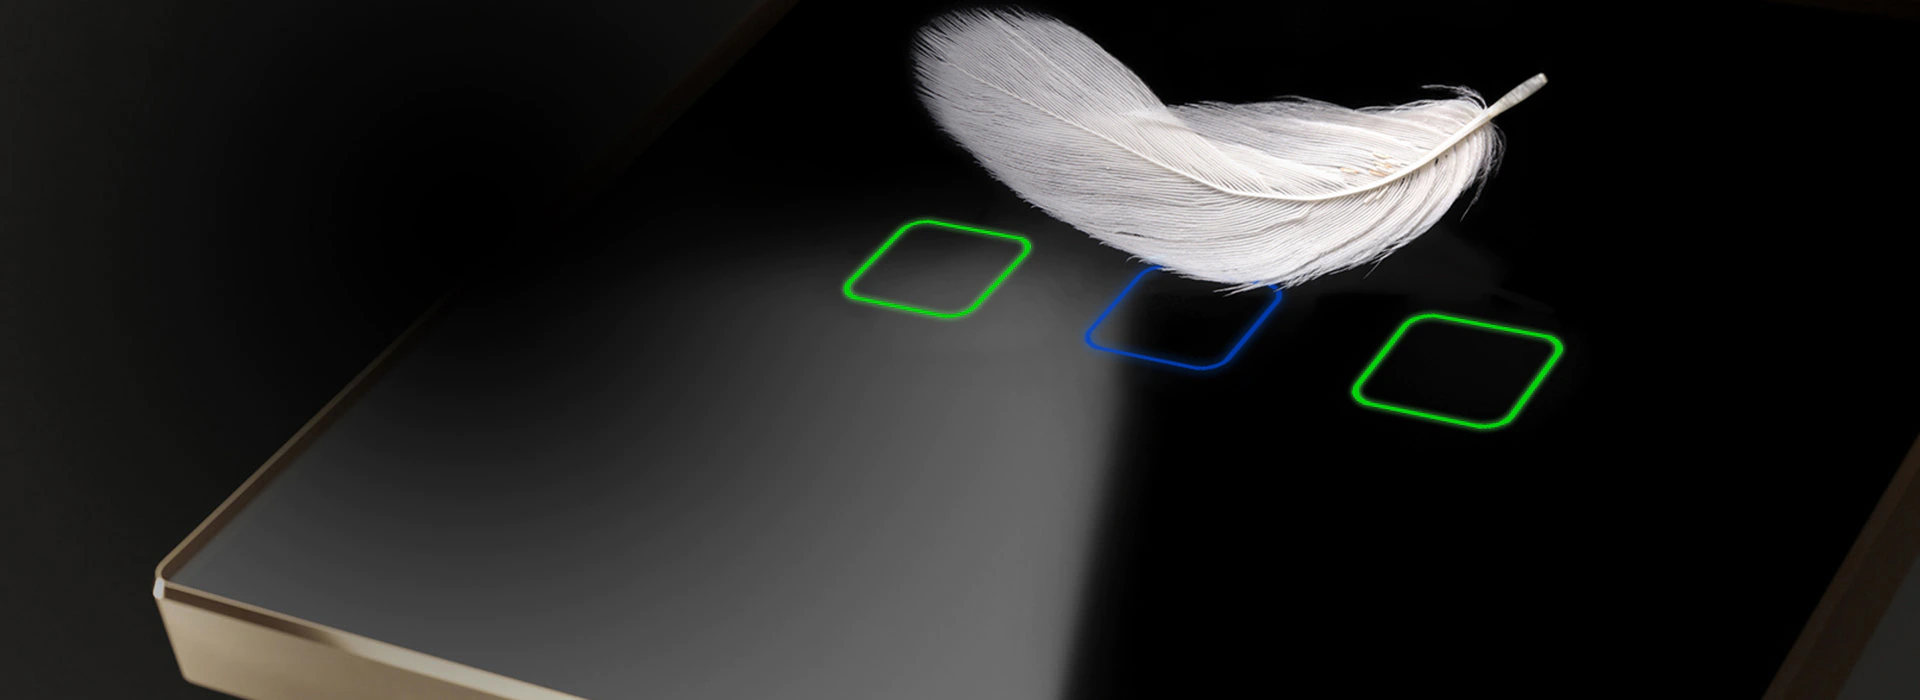 feather touch lamp switch